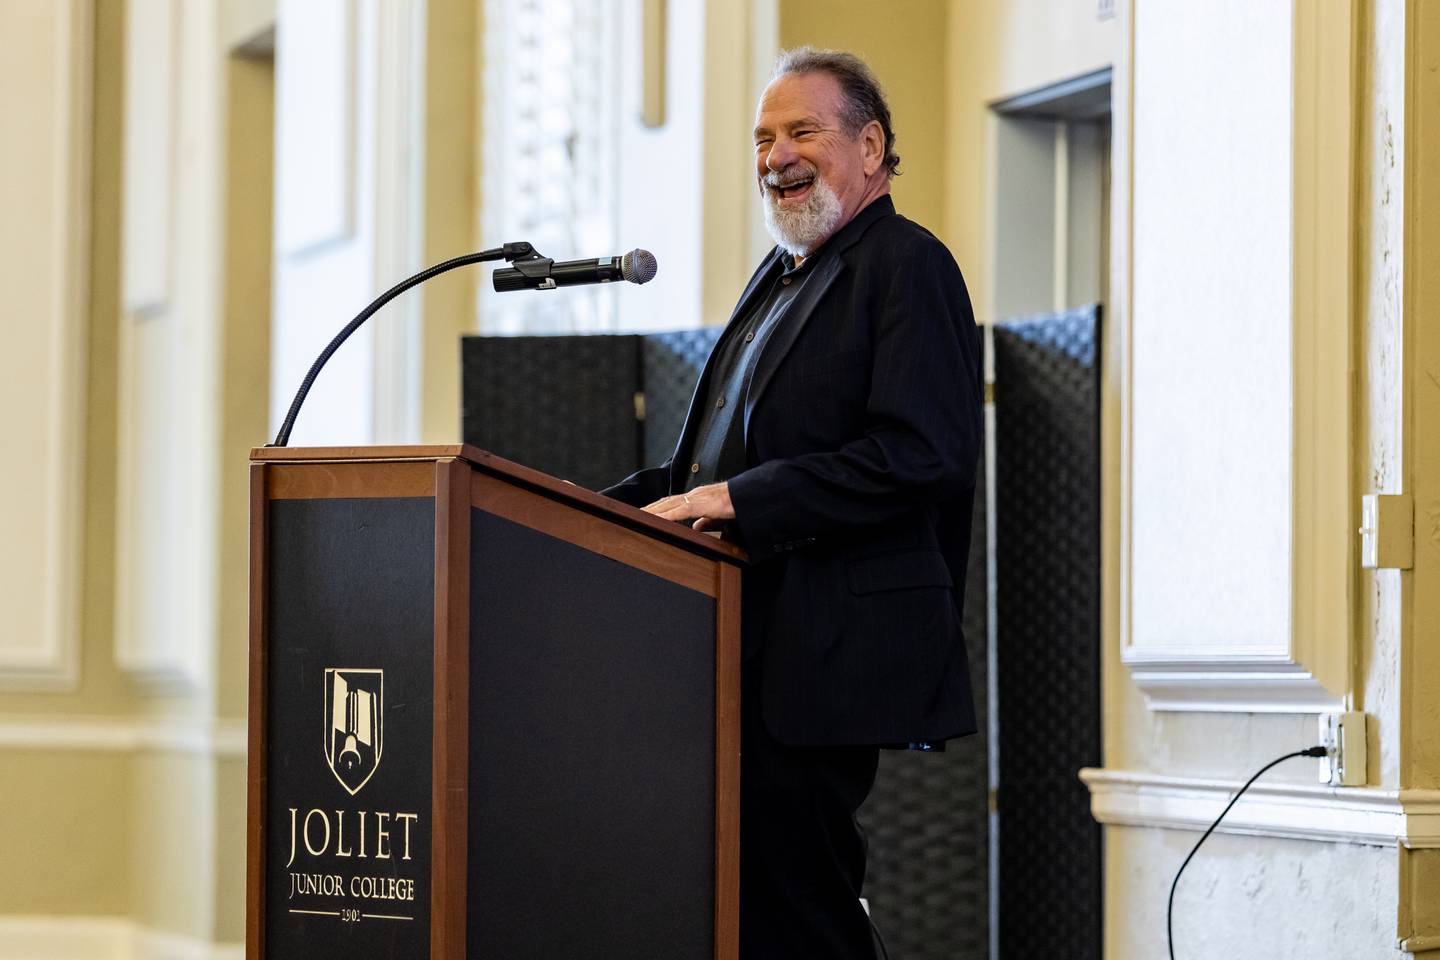 Joliet Slammers Co-Owner Mike Veeck speaks during the May Member Luncheon presented by the Joliet Region Chamber of Commerce & Industry at the Renaissance Center on May 23, 2024.